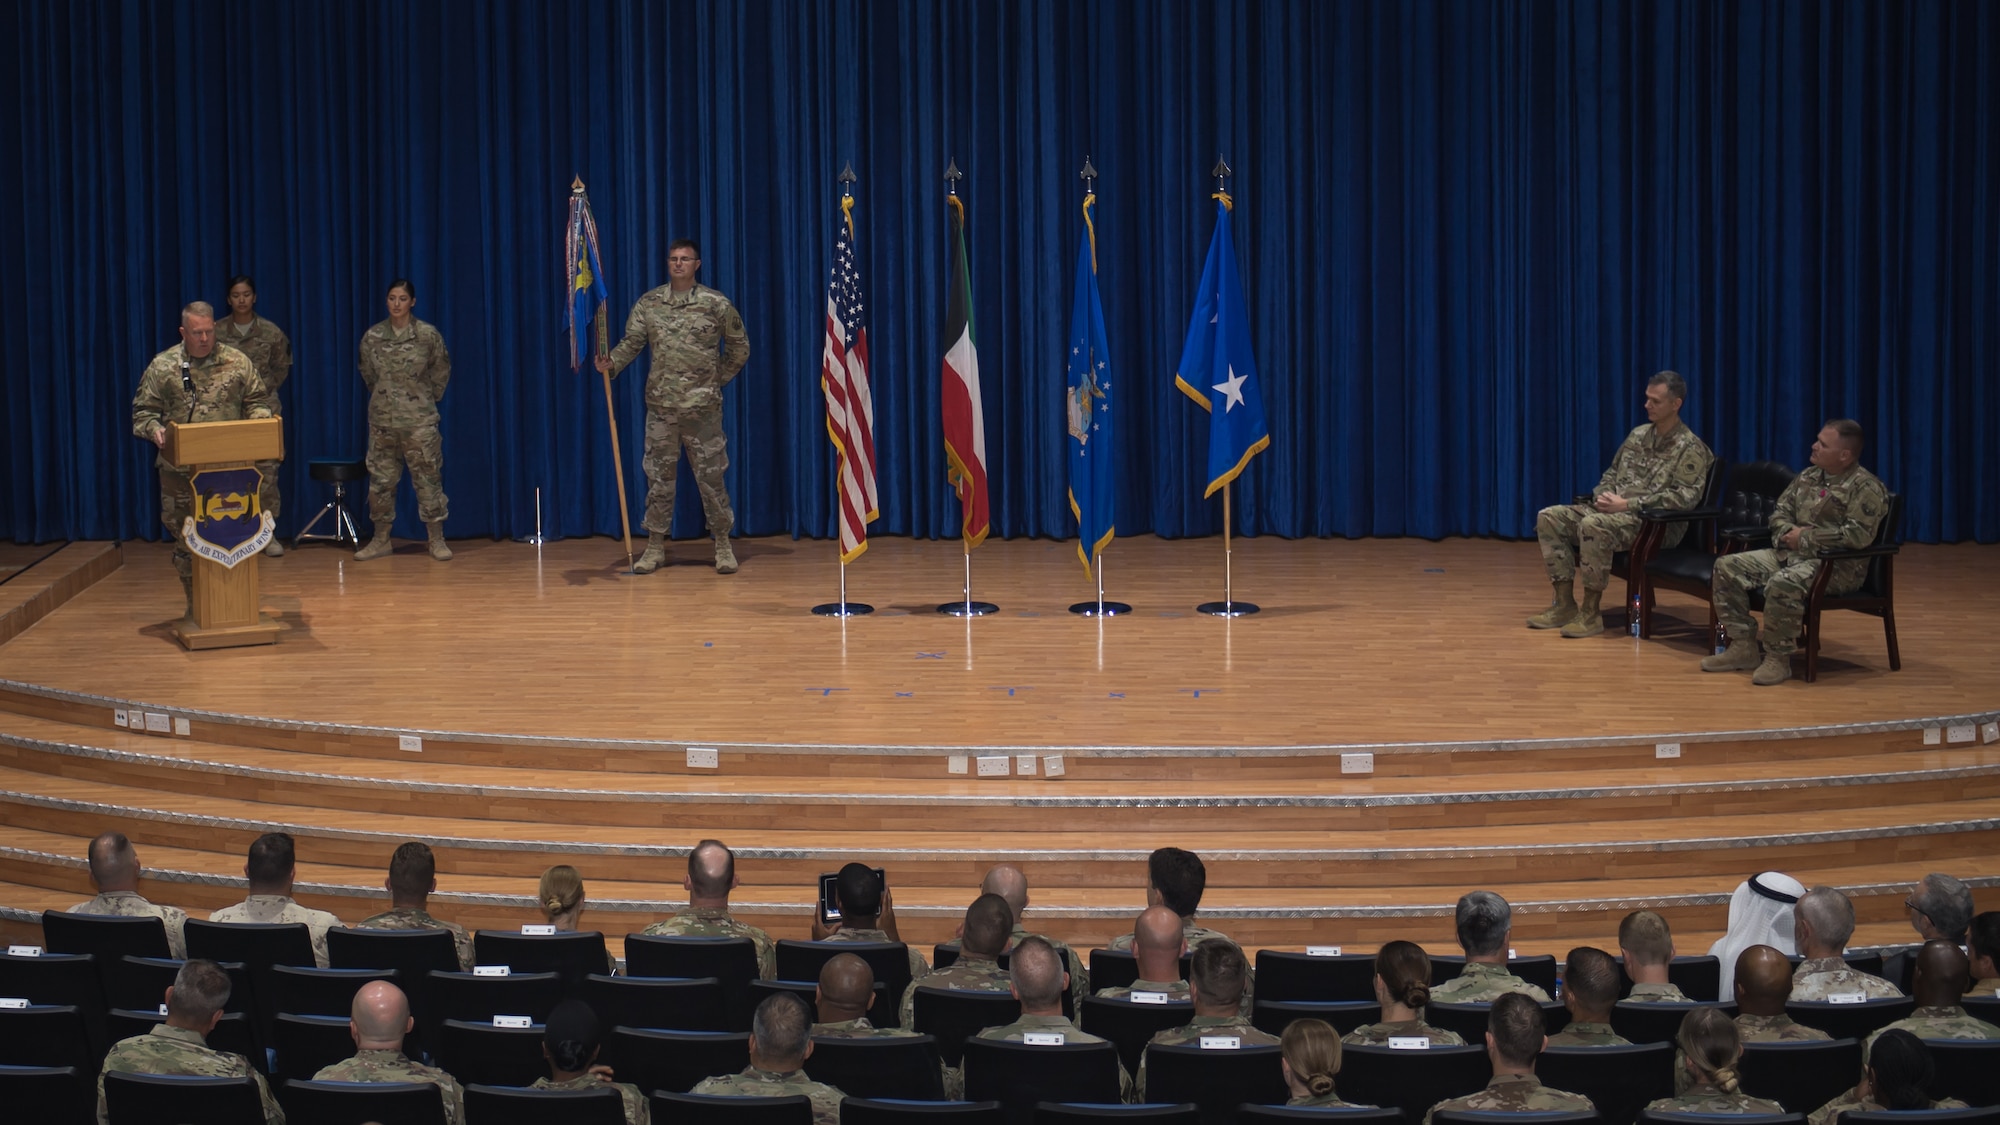 U.S. Air Force Col. Rodney Simpson addresses the audience after assuming command of the 386th Air Expeditionary Wing at Ali Al Salem Air Base, Kuwait, July 11, 2019. Simpson was previously assigned to Air Mobility Command, Scott Air Force Base, Ill. (U.S. Air Force photo by Tech. Sgt. Daniel Martinez)